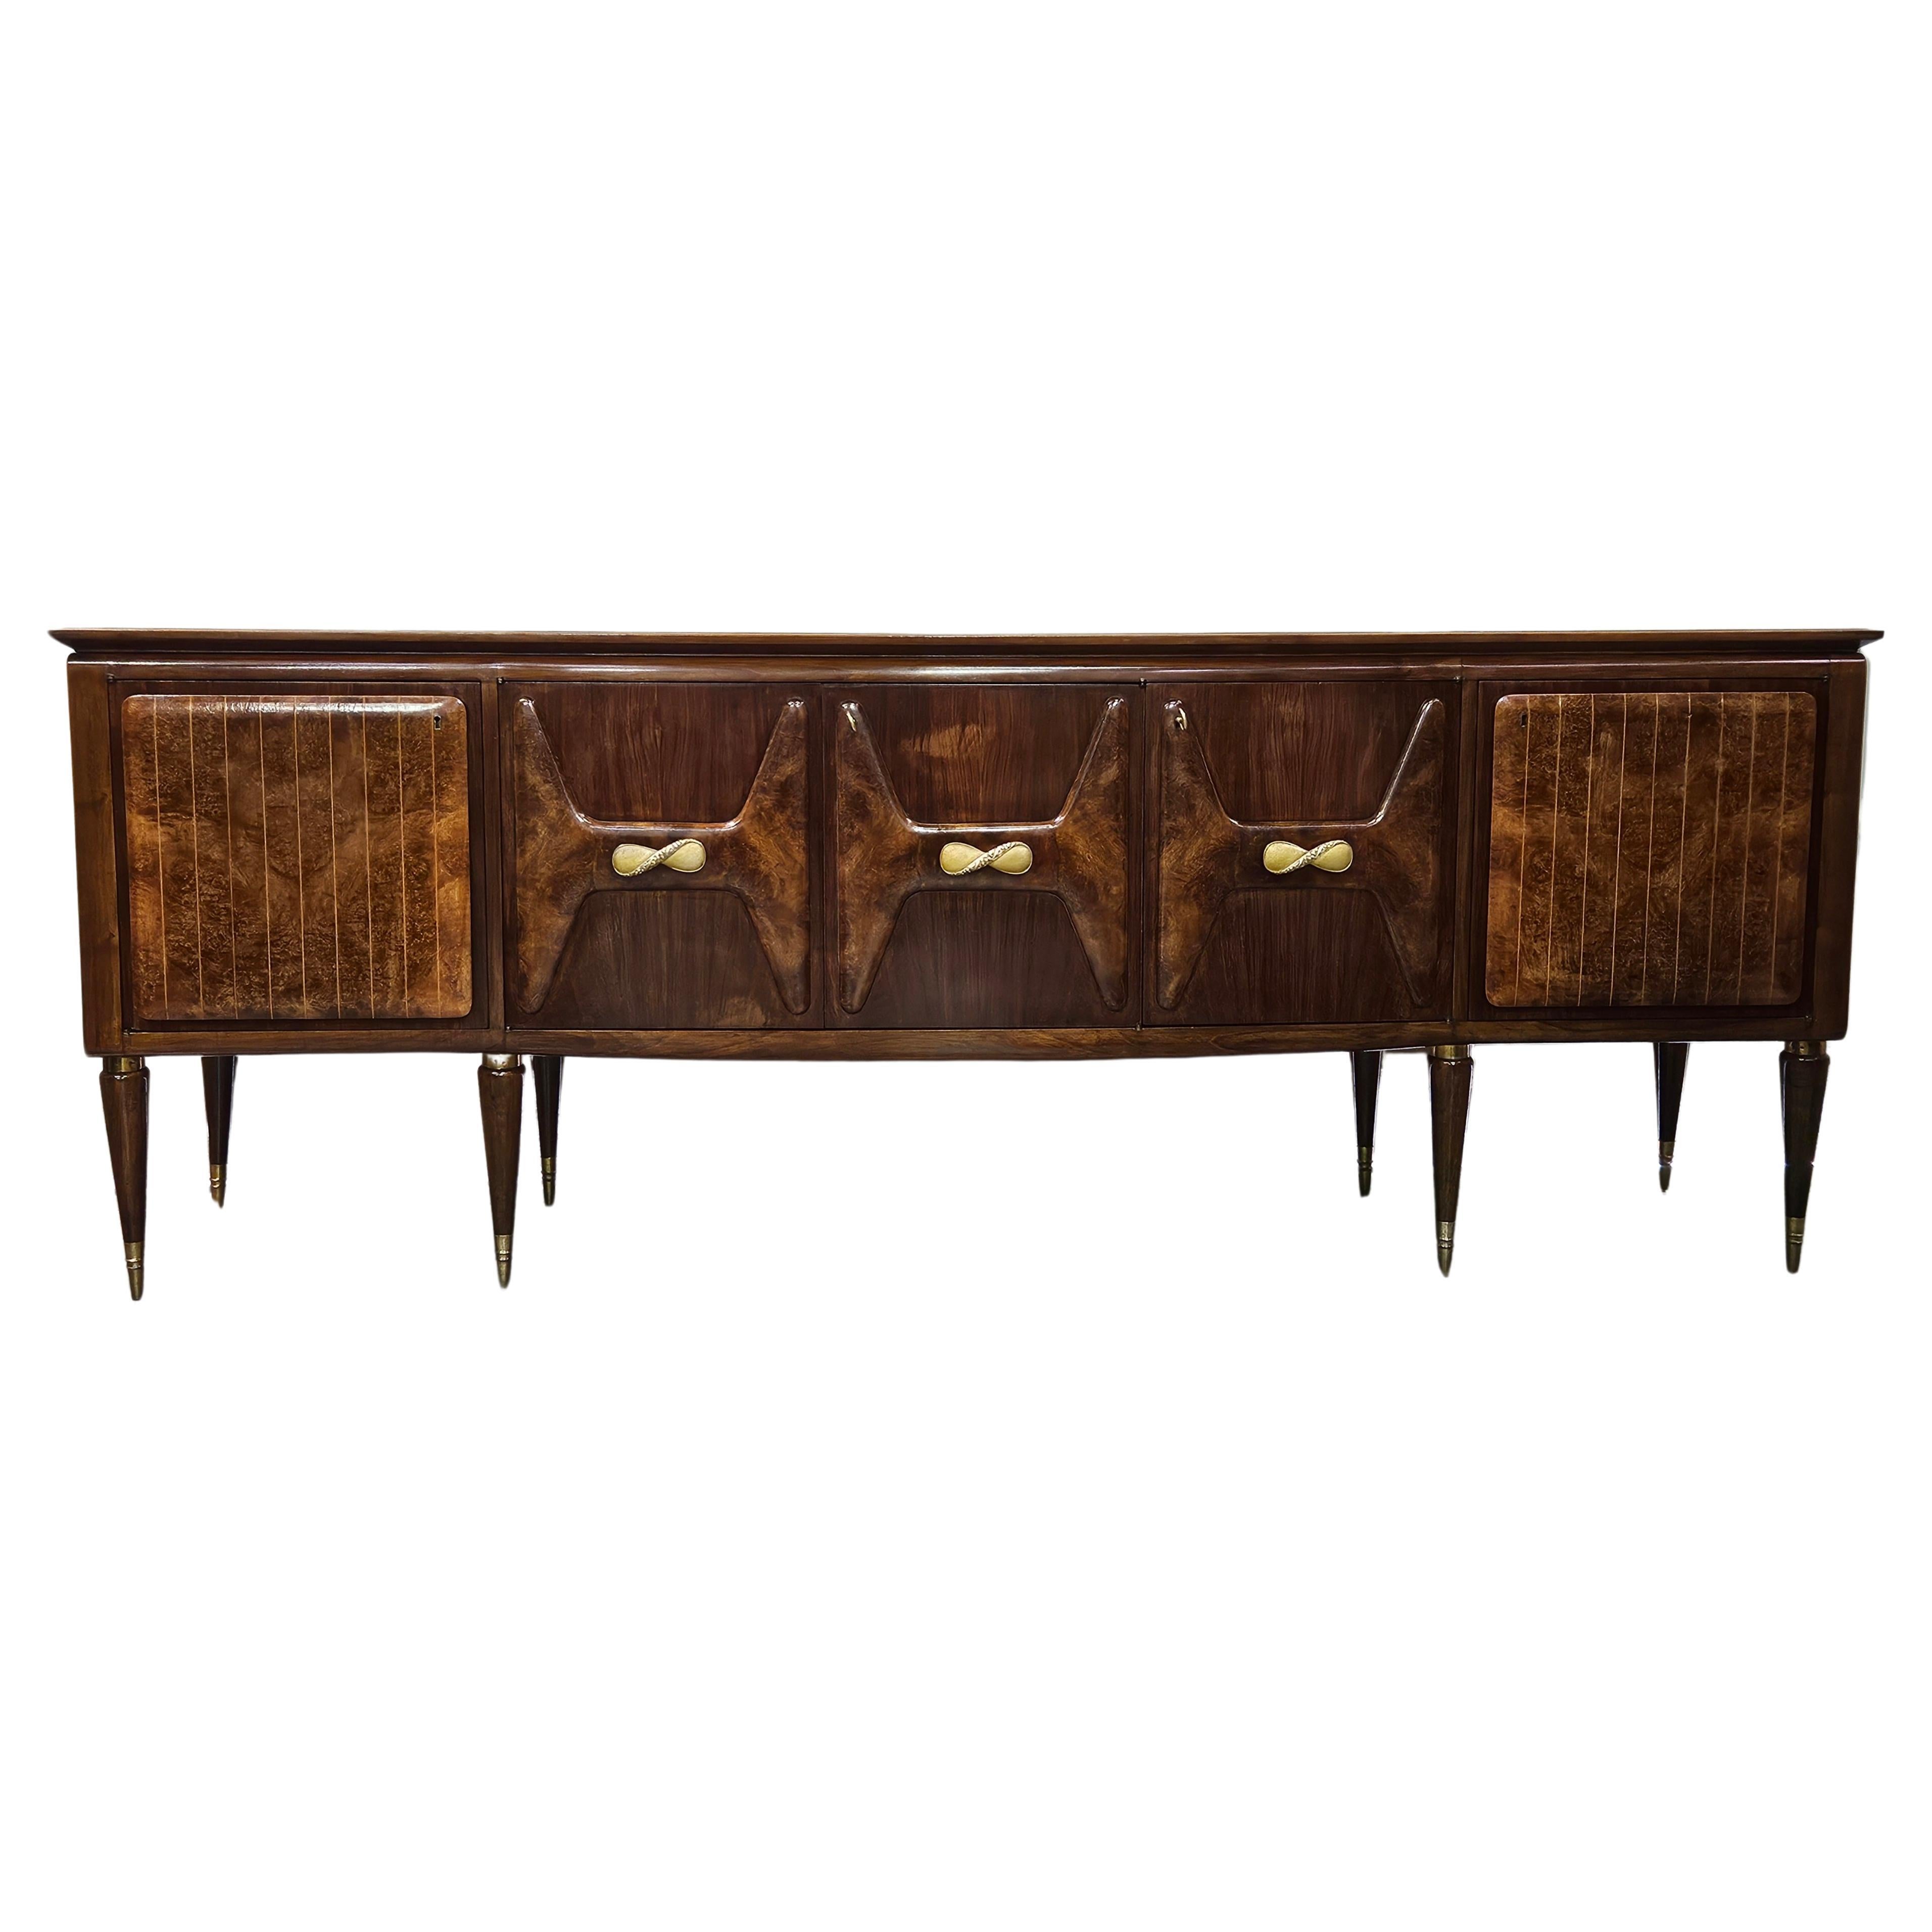 Large 1940s walnut sideboard with maple inlays and glass top